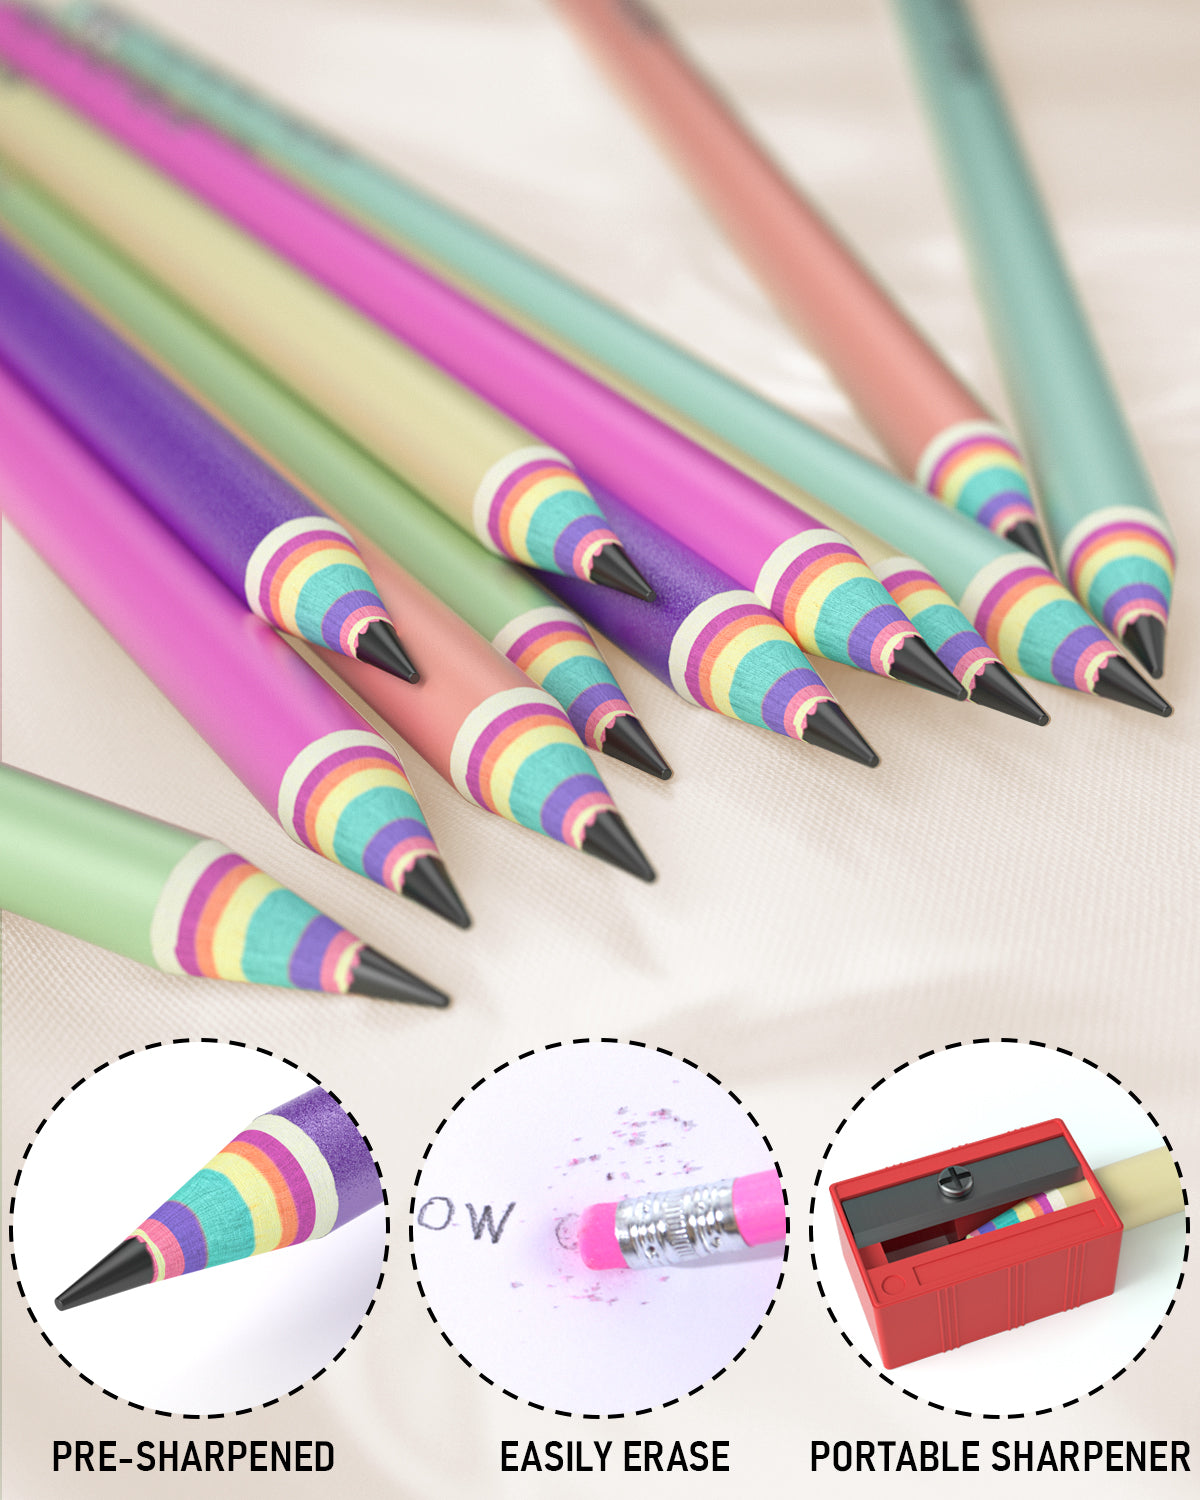 Nicpro 12PCS Pencils #2, HB Rainbow Colored Paper Pencils, Pre-Sharpened Wood-Cased Cute Pencils, Anti-Break Graphite Pencil with Eraser for Student Writing Drawing Drafting Sketching School Supplies